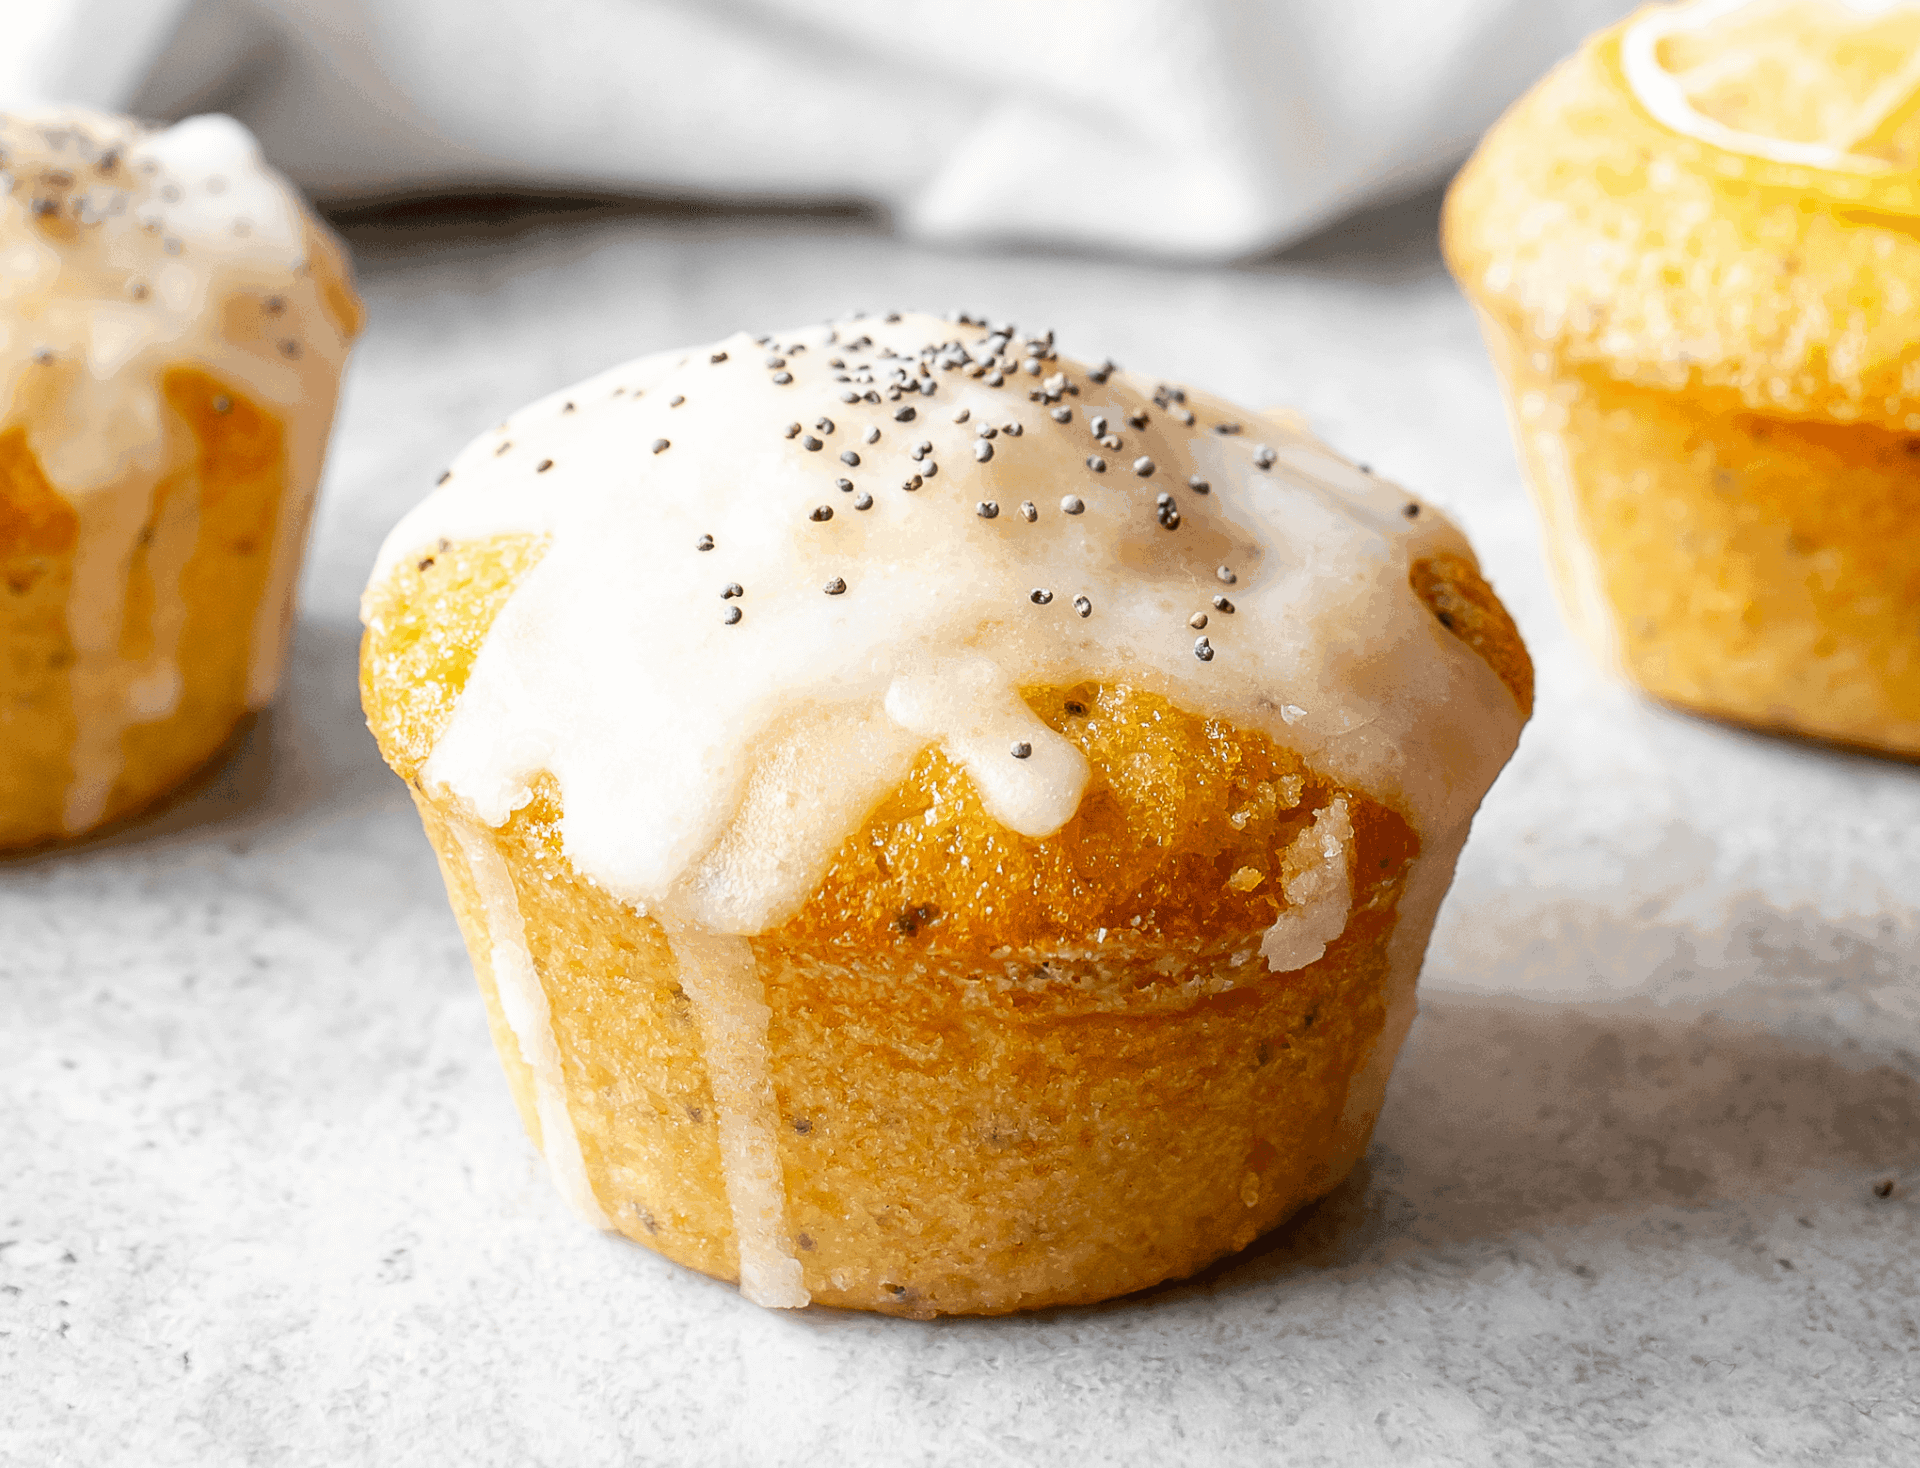 Muffin topped with glaze and poppyseeds.